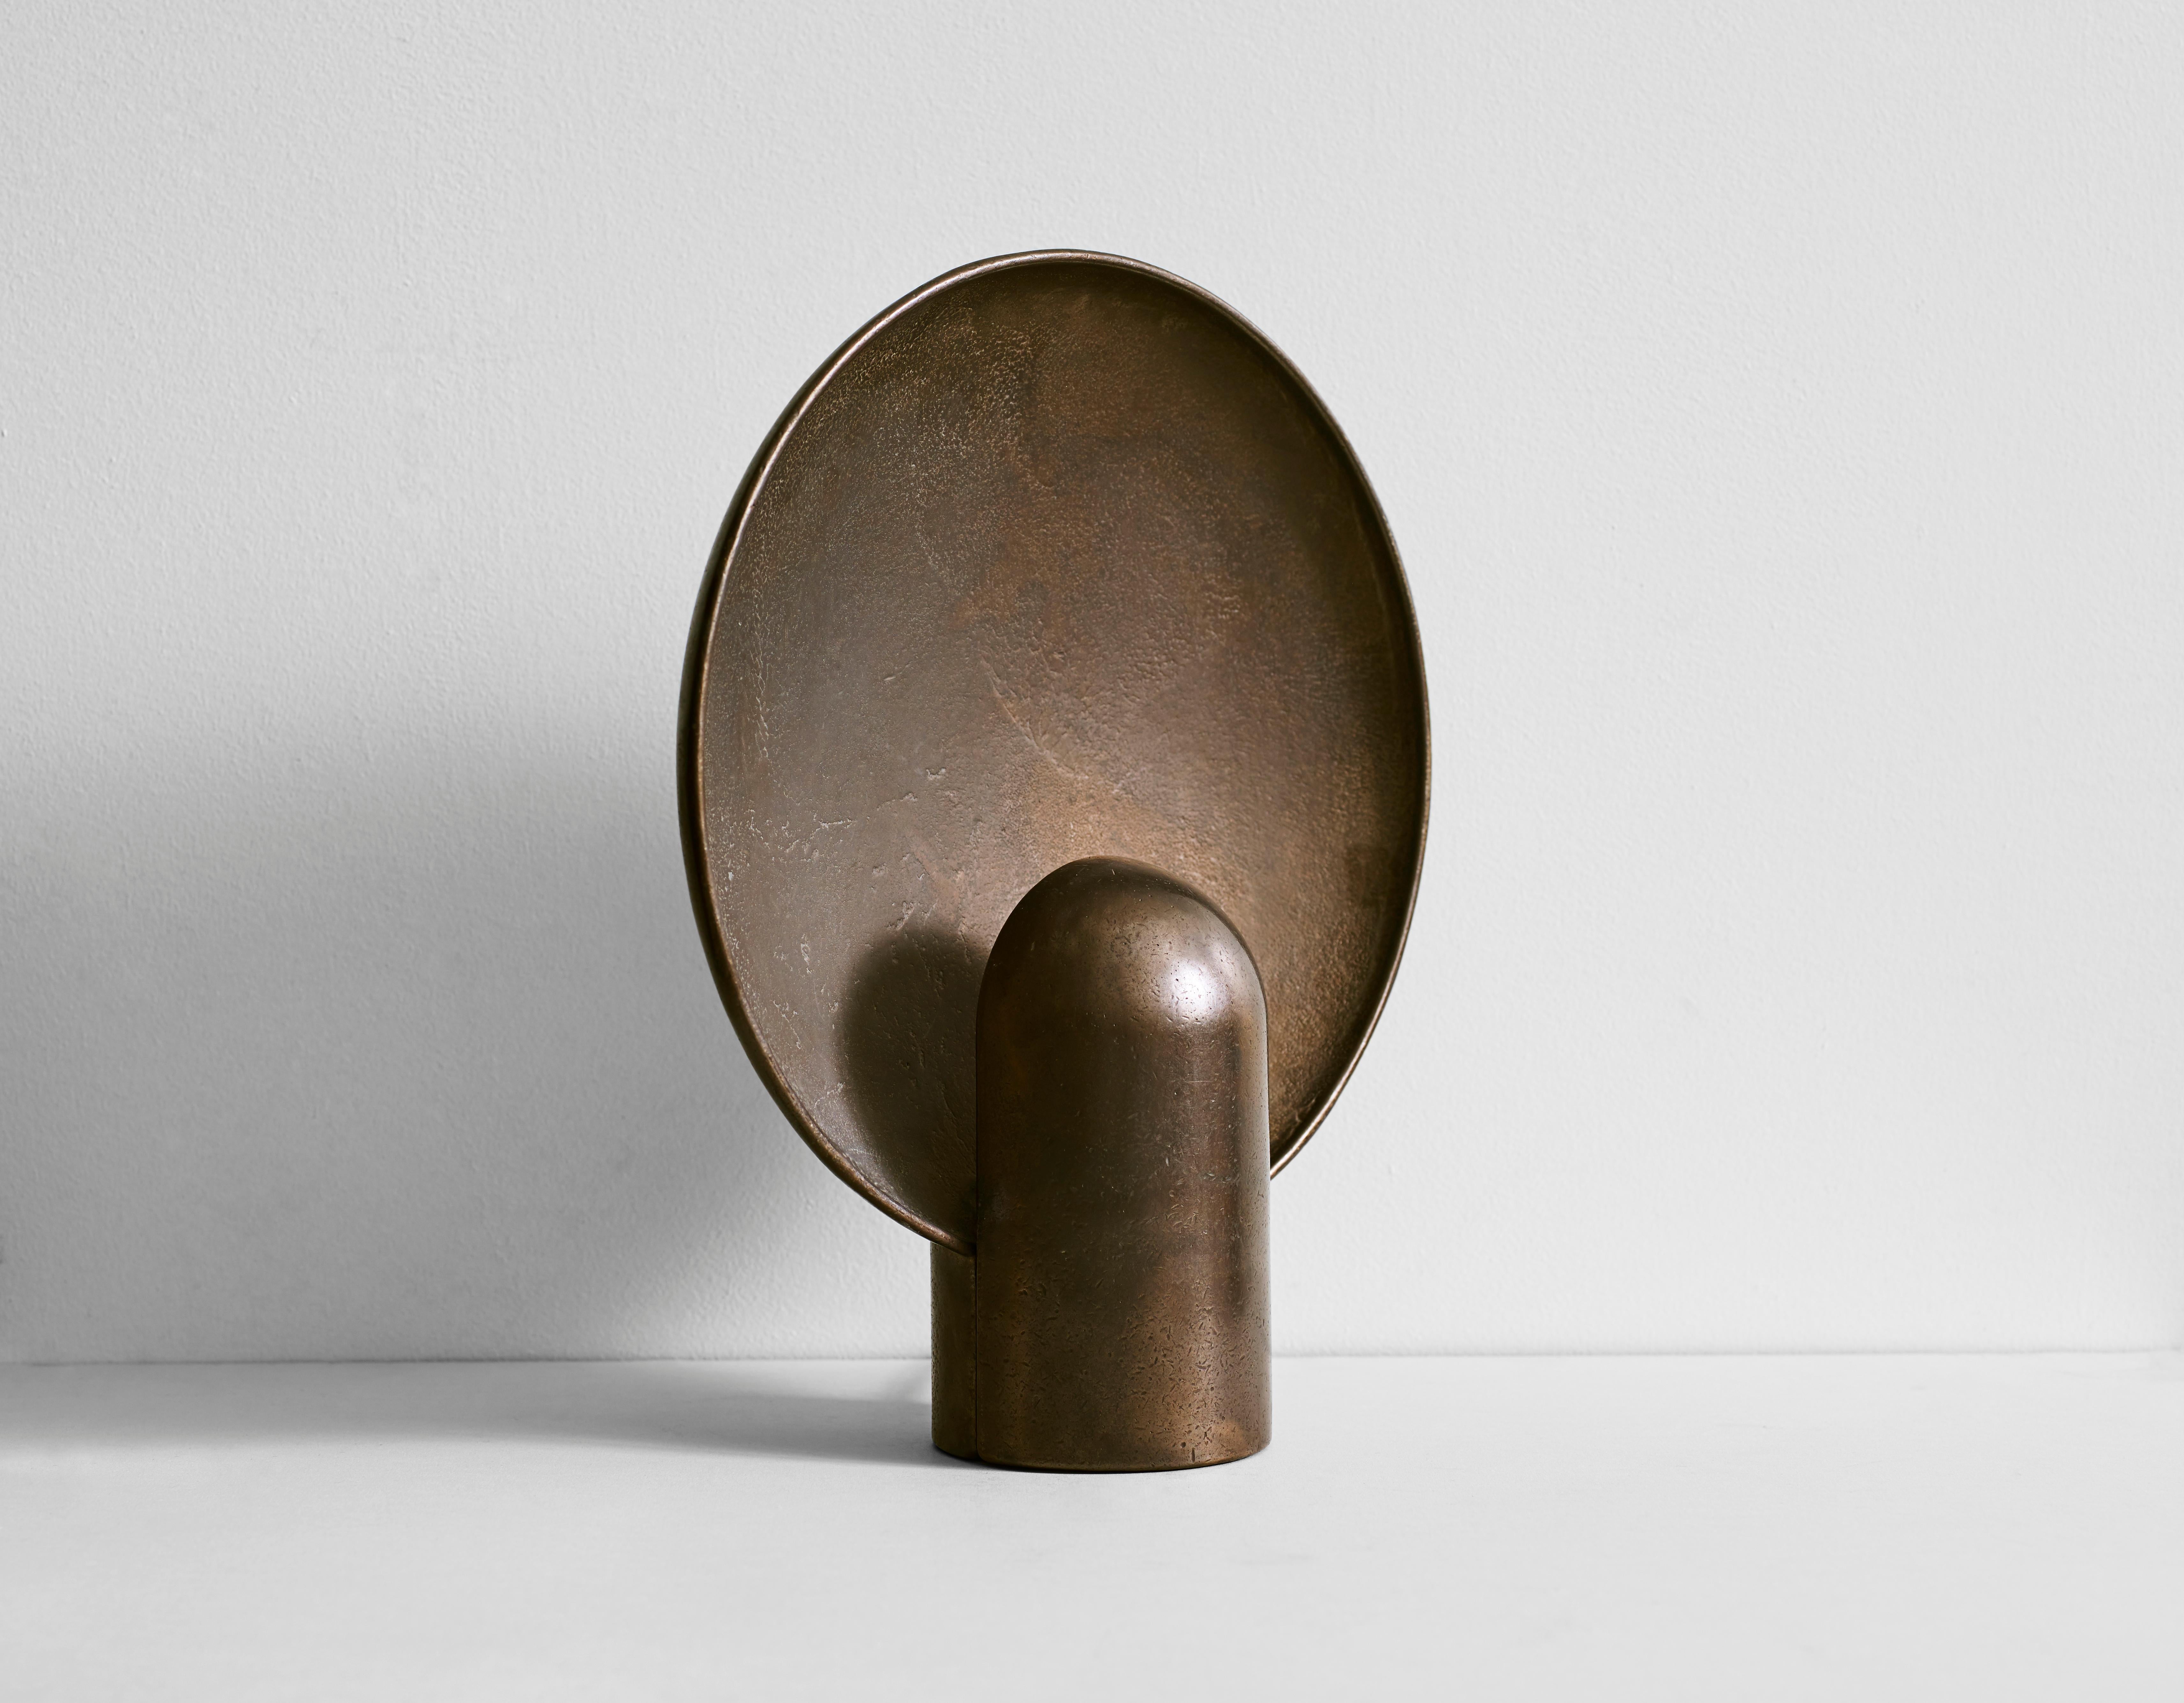 Blackened Surface Sconce by Henry Wilson
Dimensions: W 30 x D 11 x H 35 cm
Materials: Bronze (Blackened)

This sculptural item is handmade in Sydney Australia.
Also available in different stones.

The blackened surface sconce is an ambient,